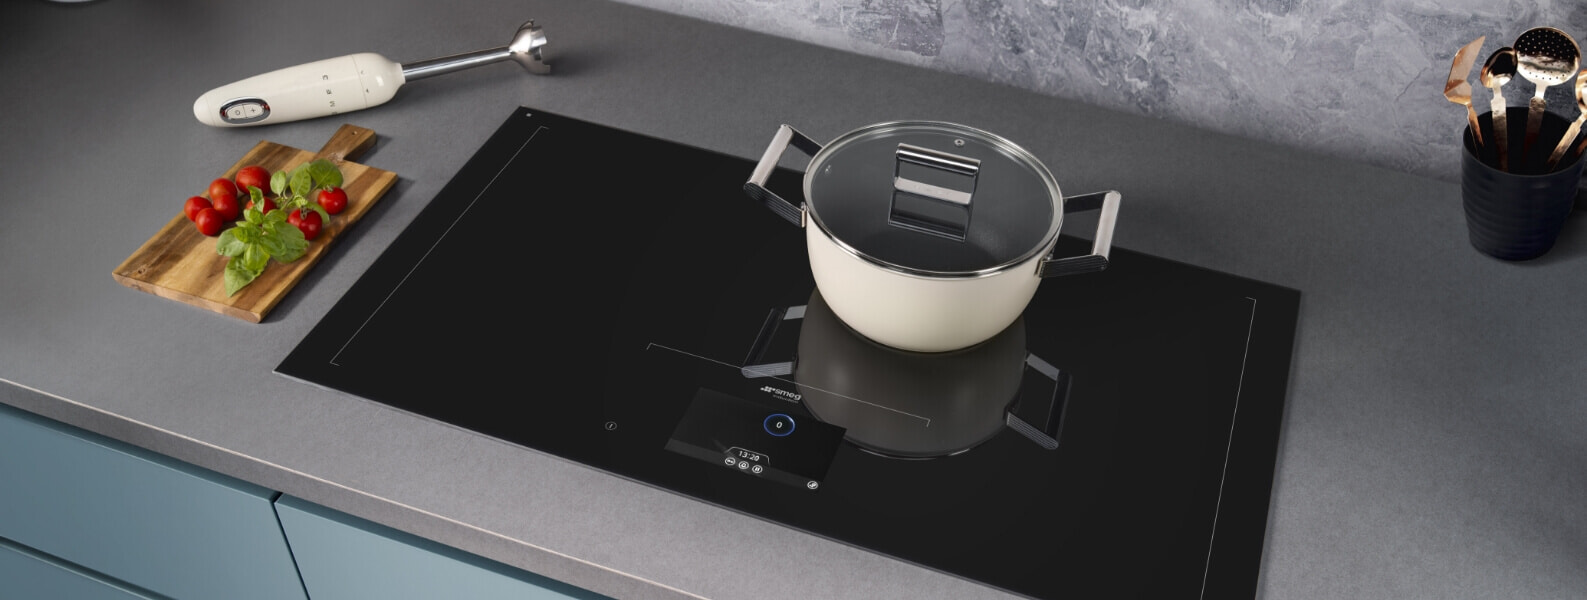 A Smeg induction cooktop in a grey kitchen with a white pot on top of it